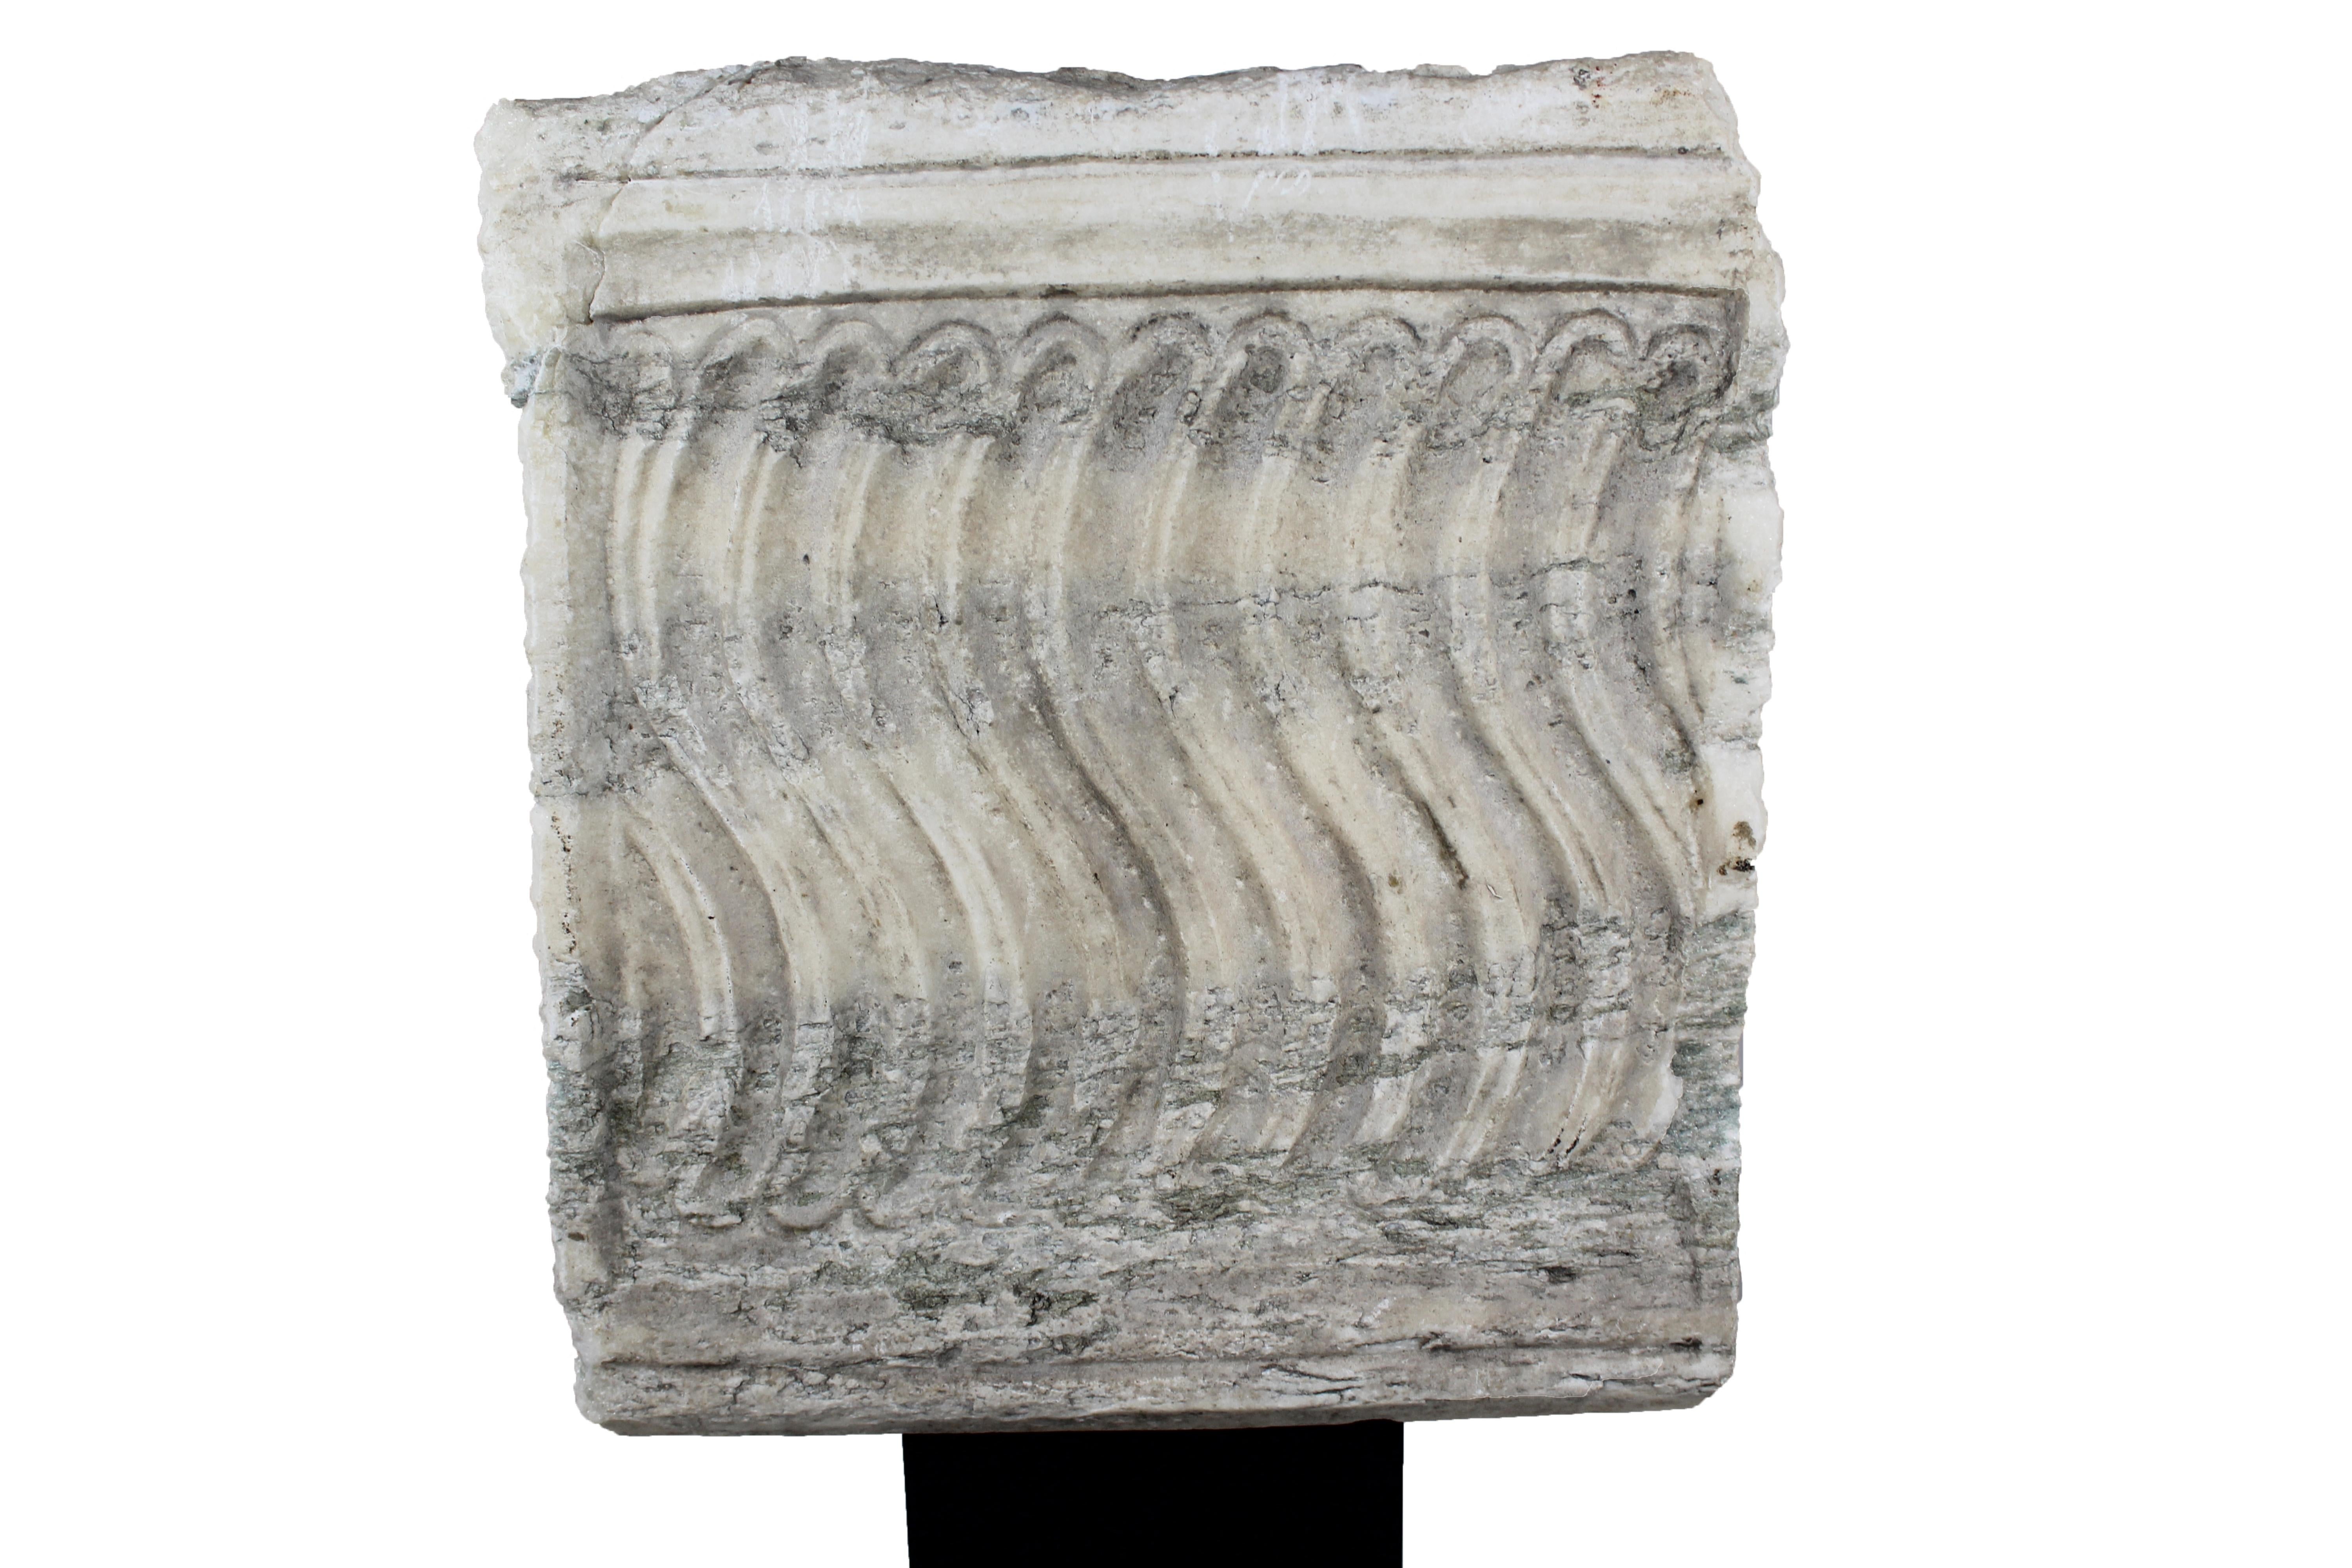 Roman Antique Marble Sculpture, 2nd Century Ad, South of France In Good Condition For Sale In Girona, Spain